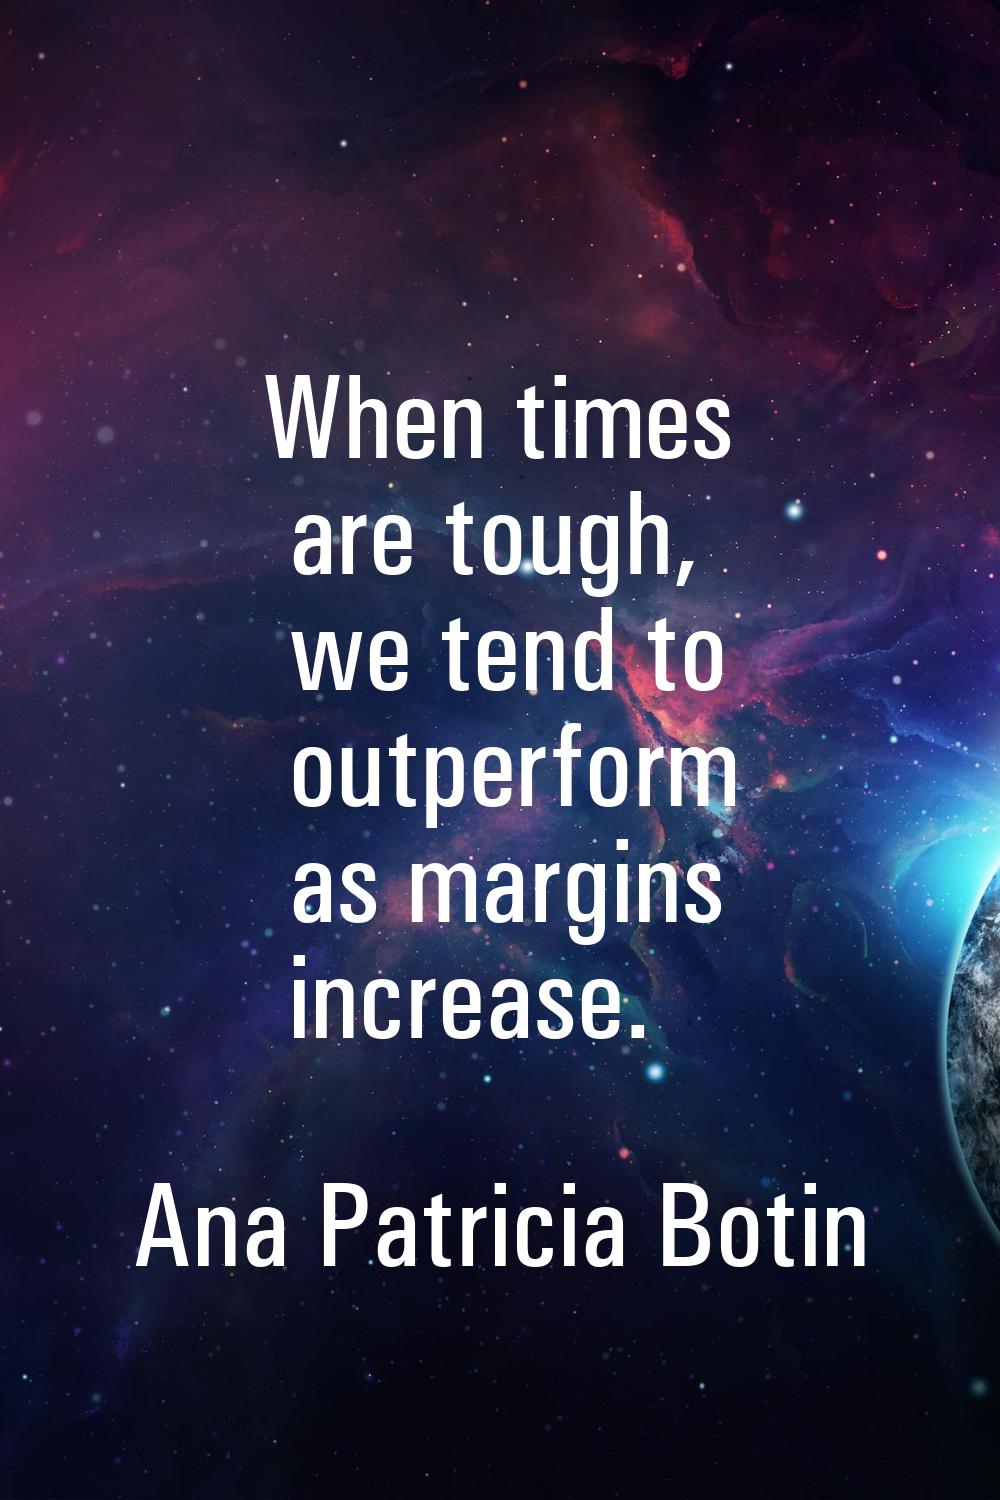 When times are tough, we tend to outperform as margins increase.